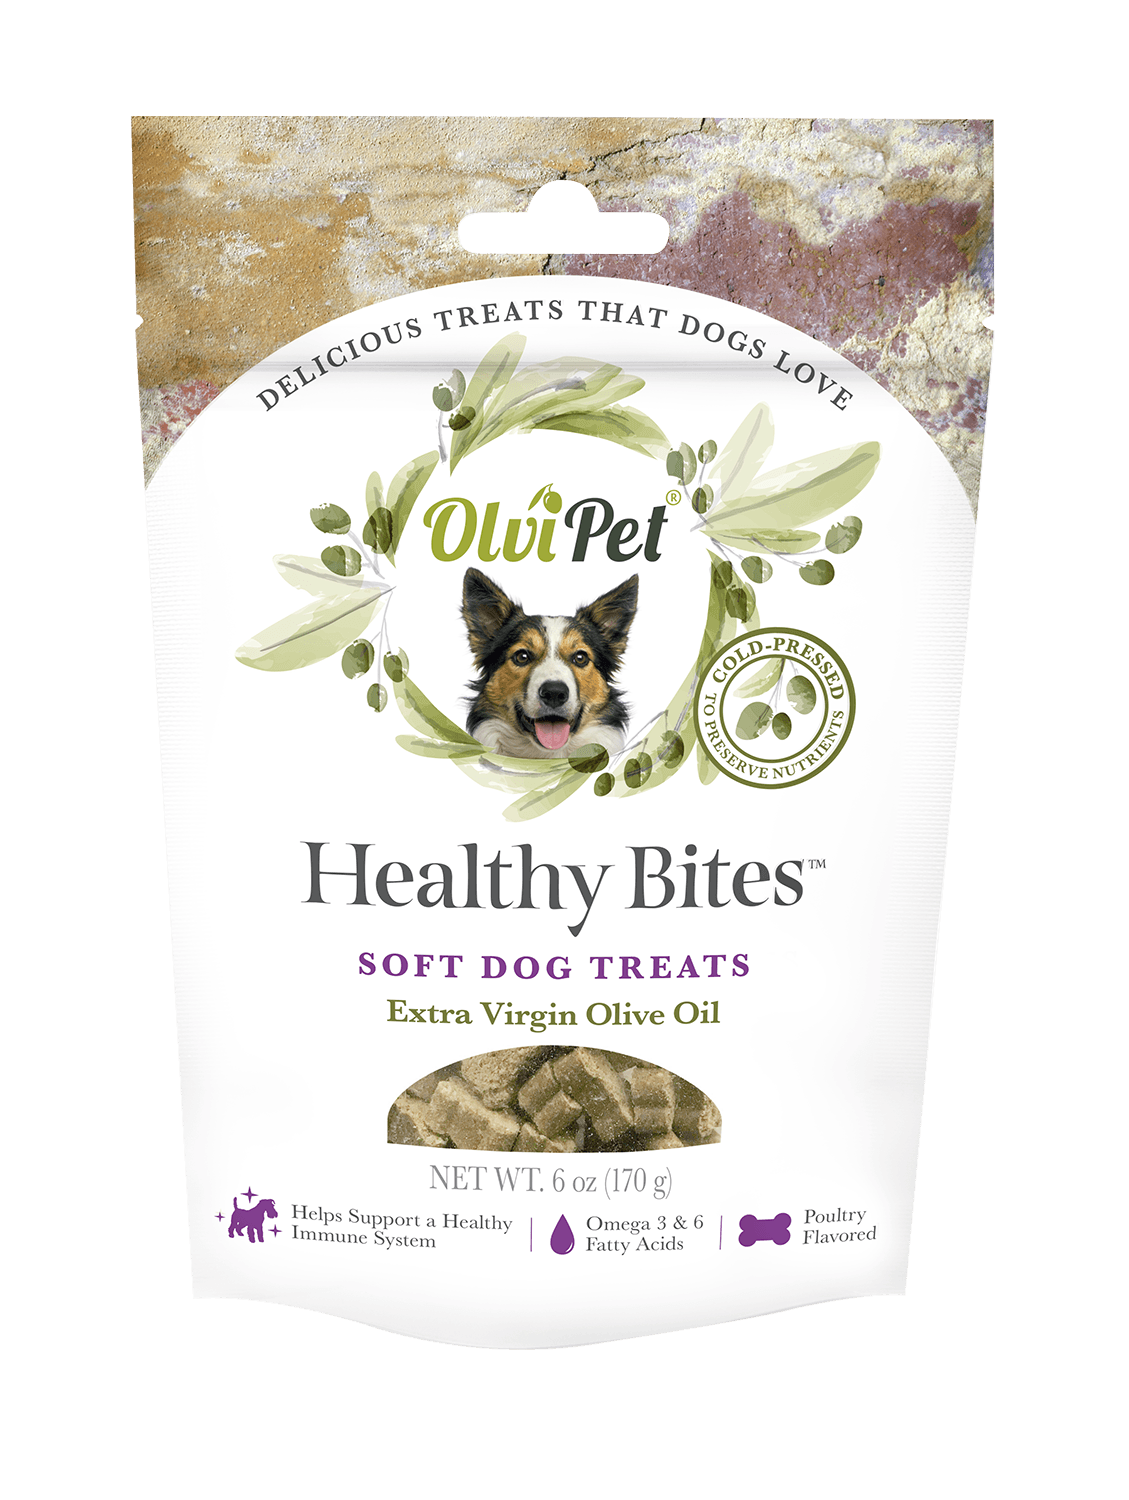 ~OlviPet – DELICIOUS TREATS THAT DOGS LOVE!